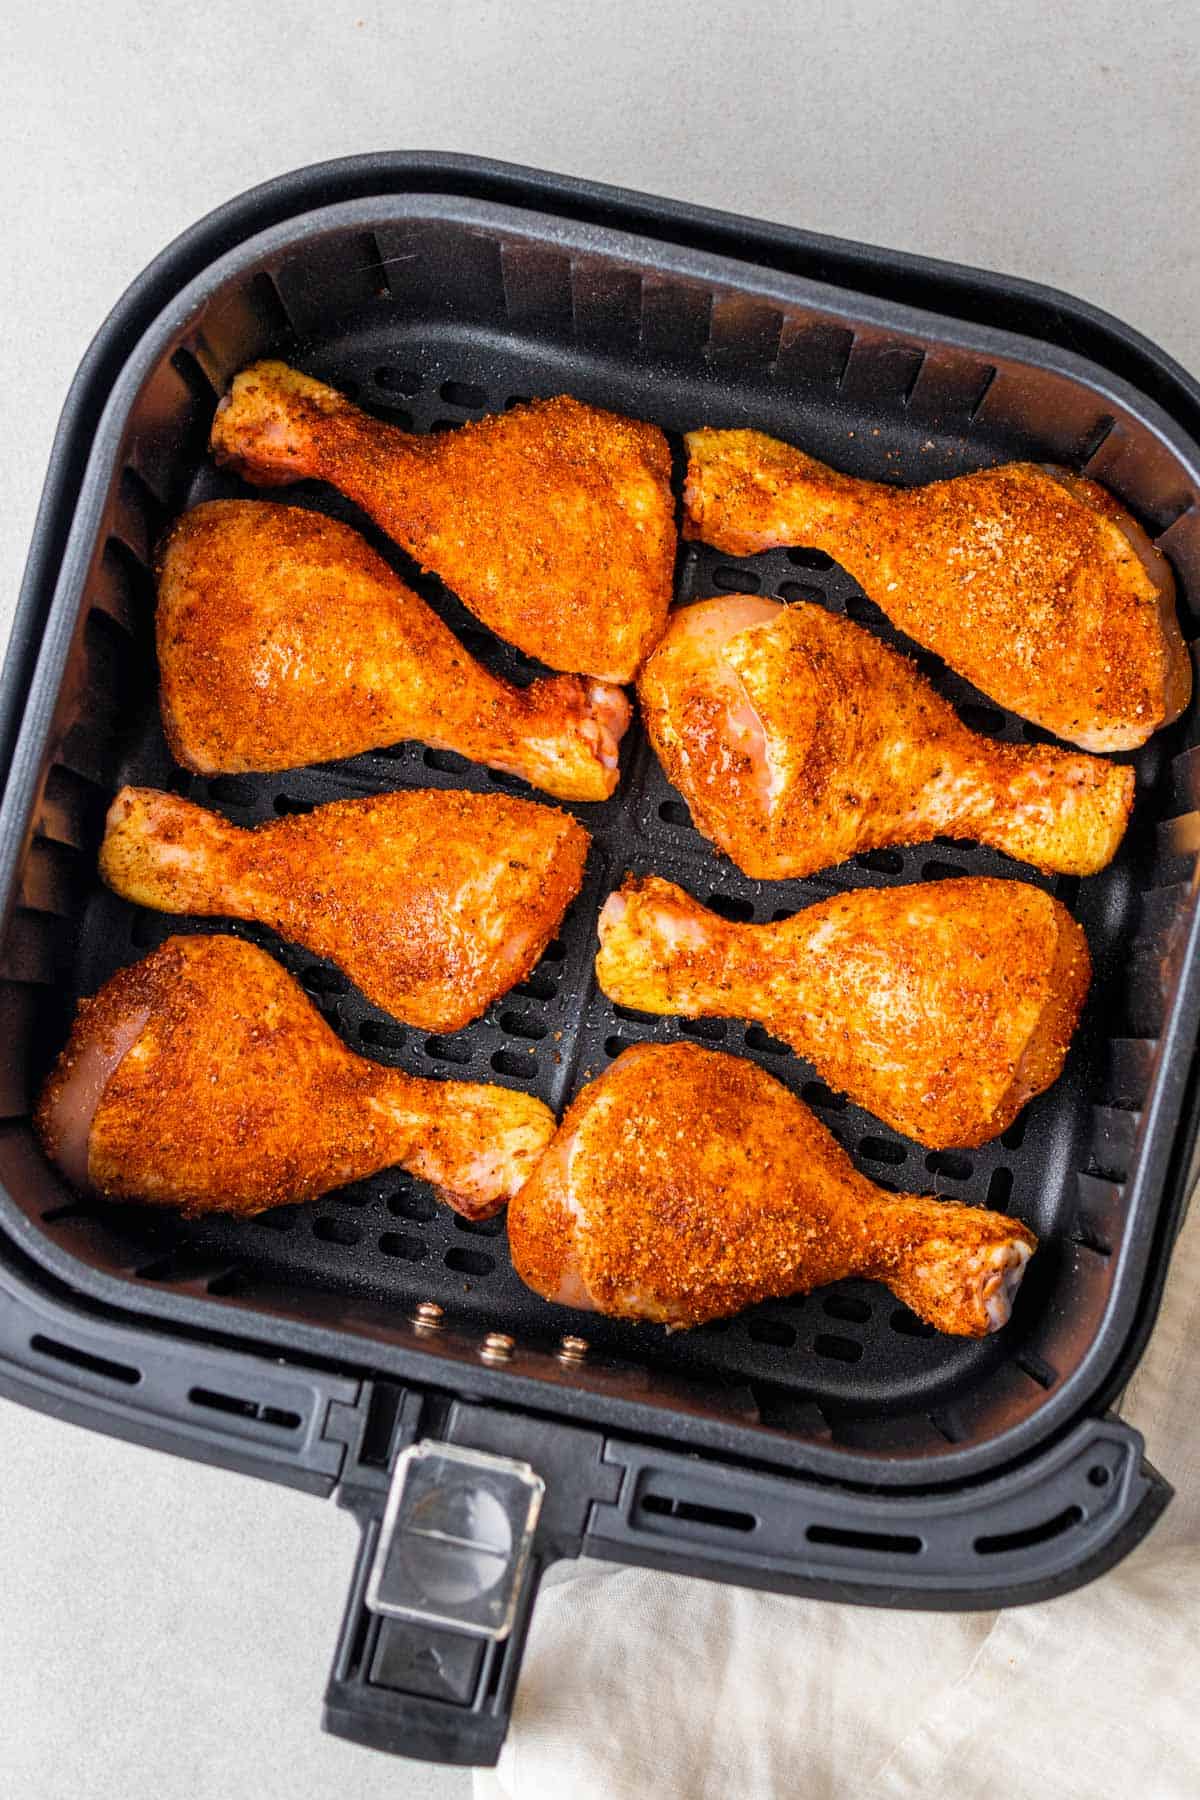 drumsticks laid out in the air fryer basket before cooking them in the air fryer